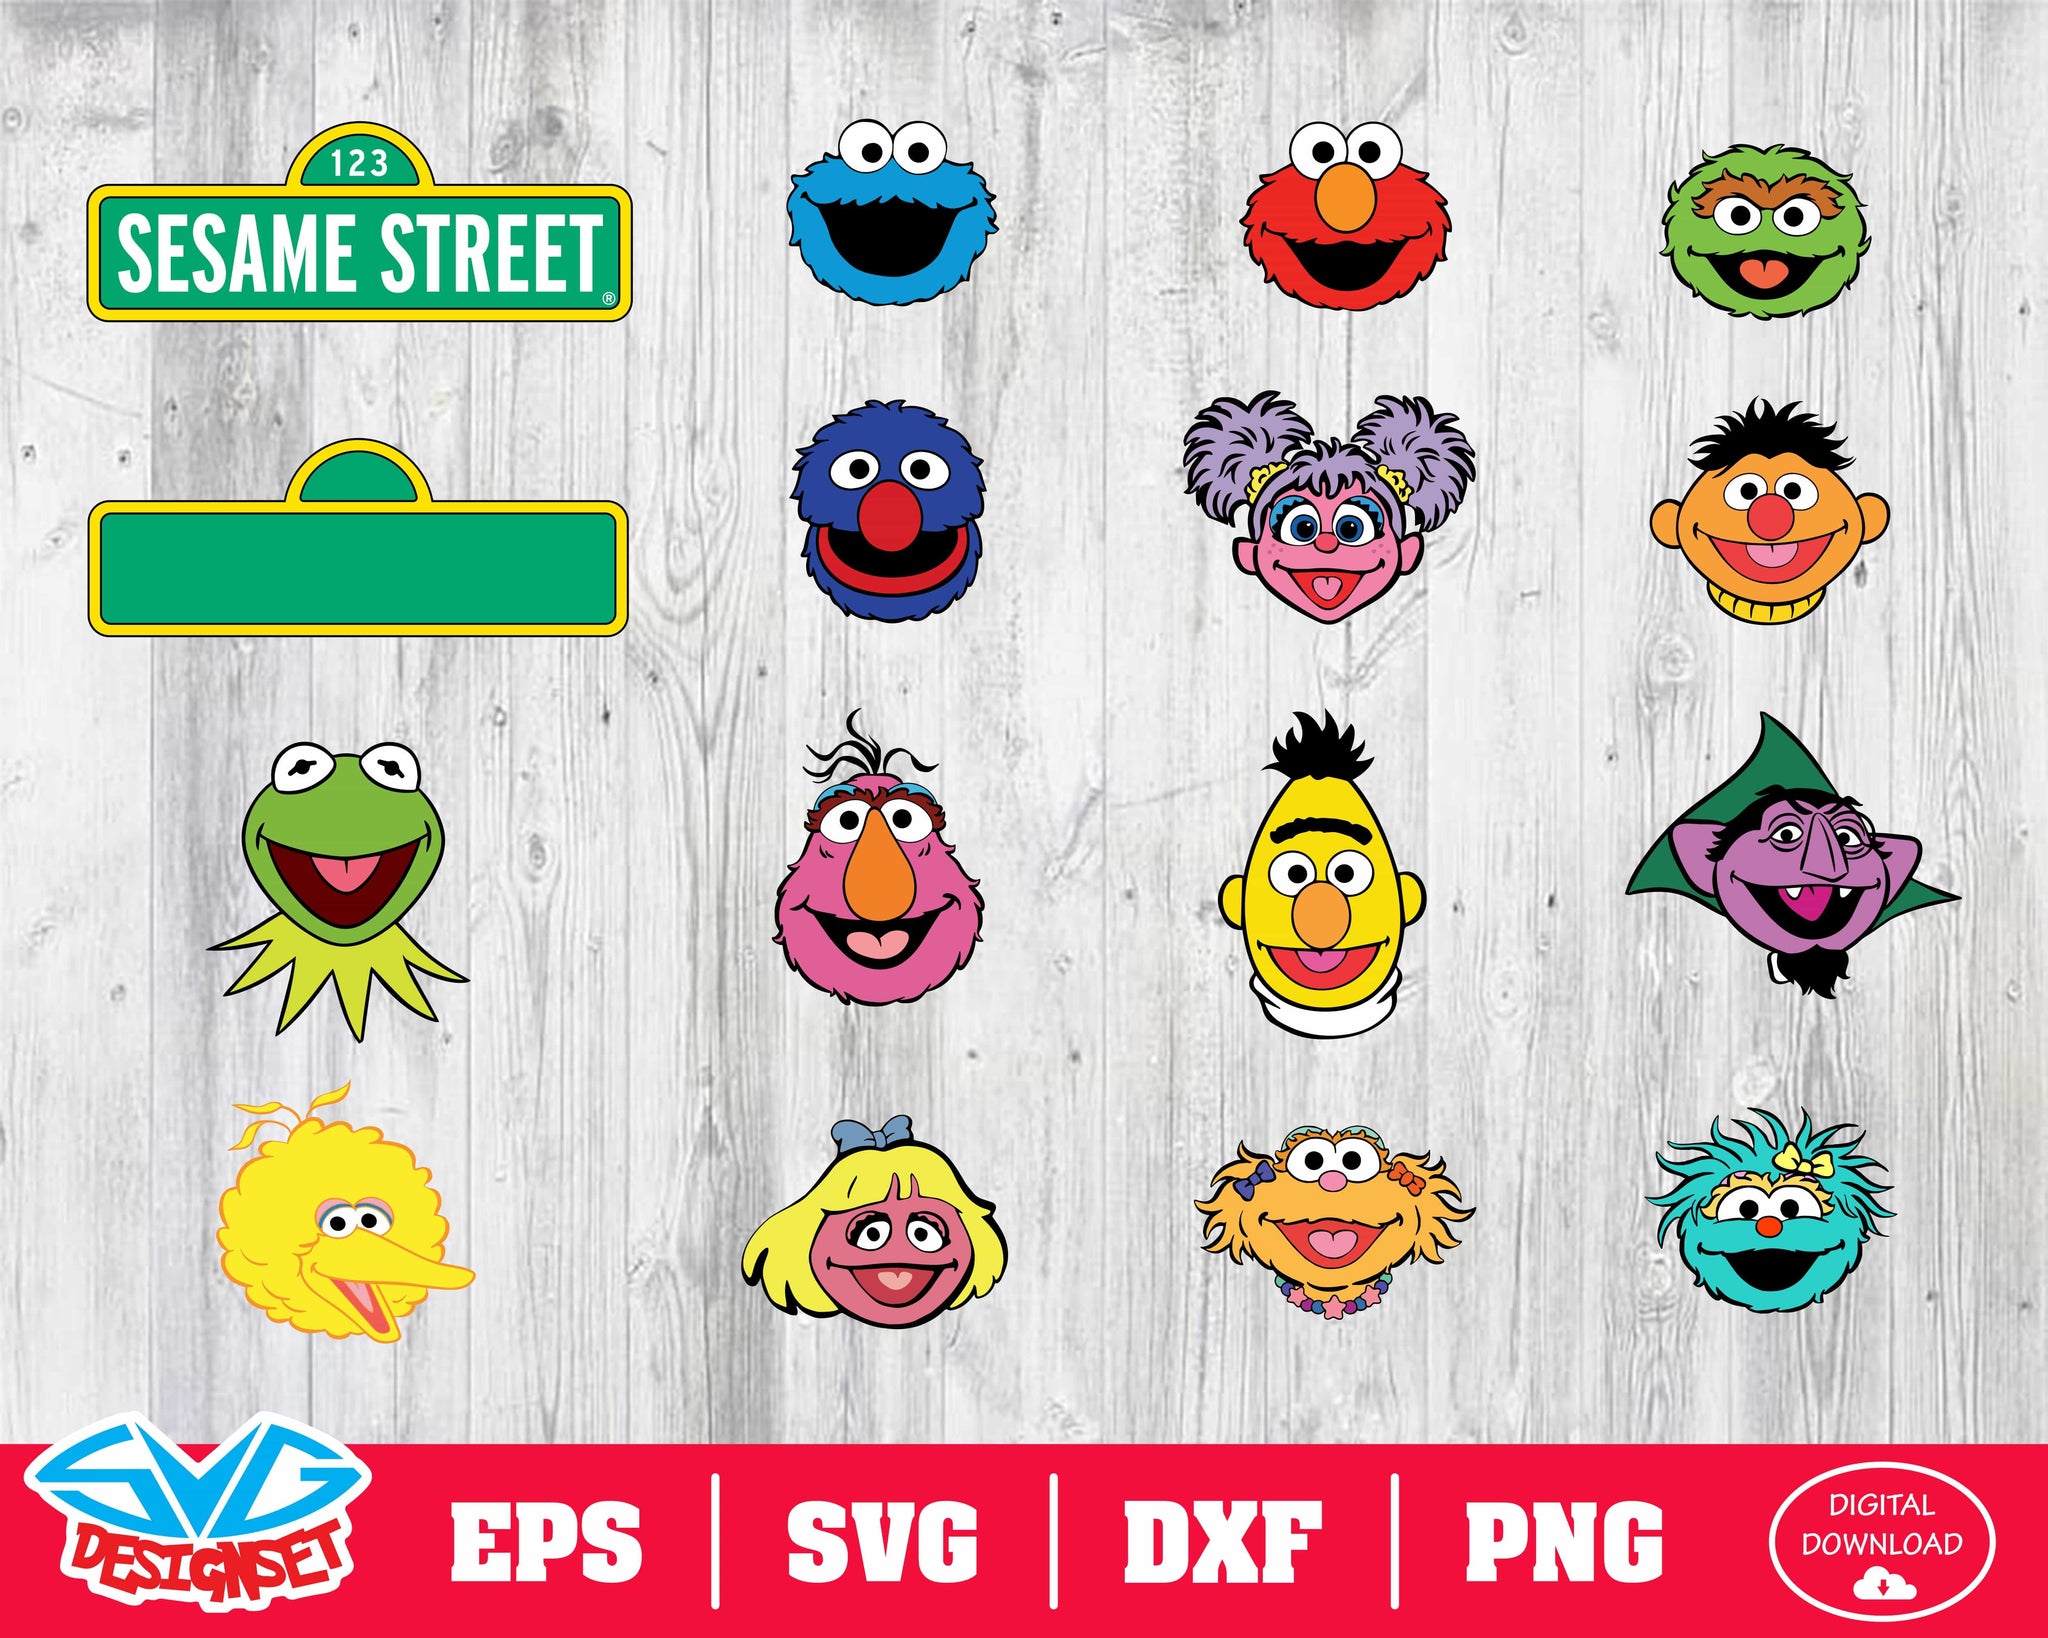 Sesame Street Svg, Dxf, Eps, Png, Clipart, Silhouette and Cutfiles #1 - SVGDesignSets